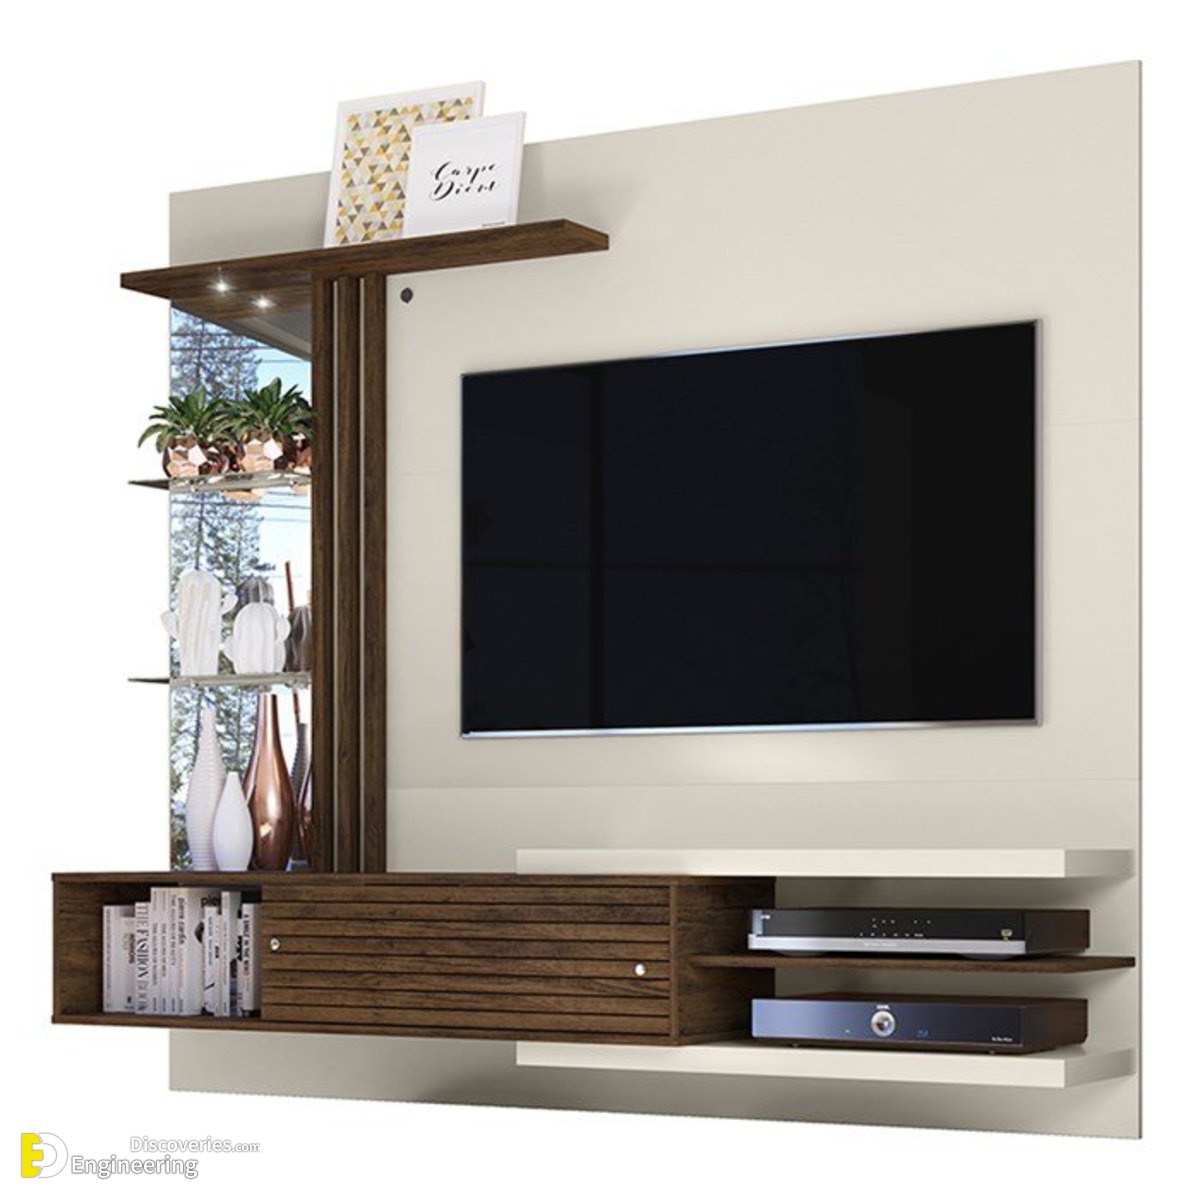 Top 50 Modern TV Stand Design Ideas For 2020 - Engineering ...